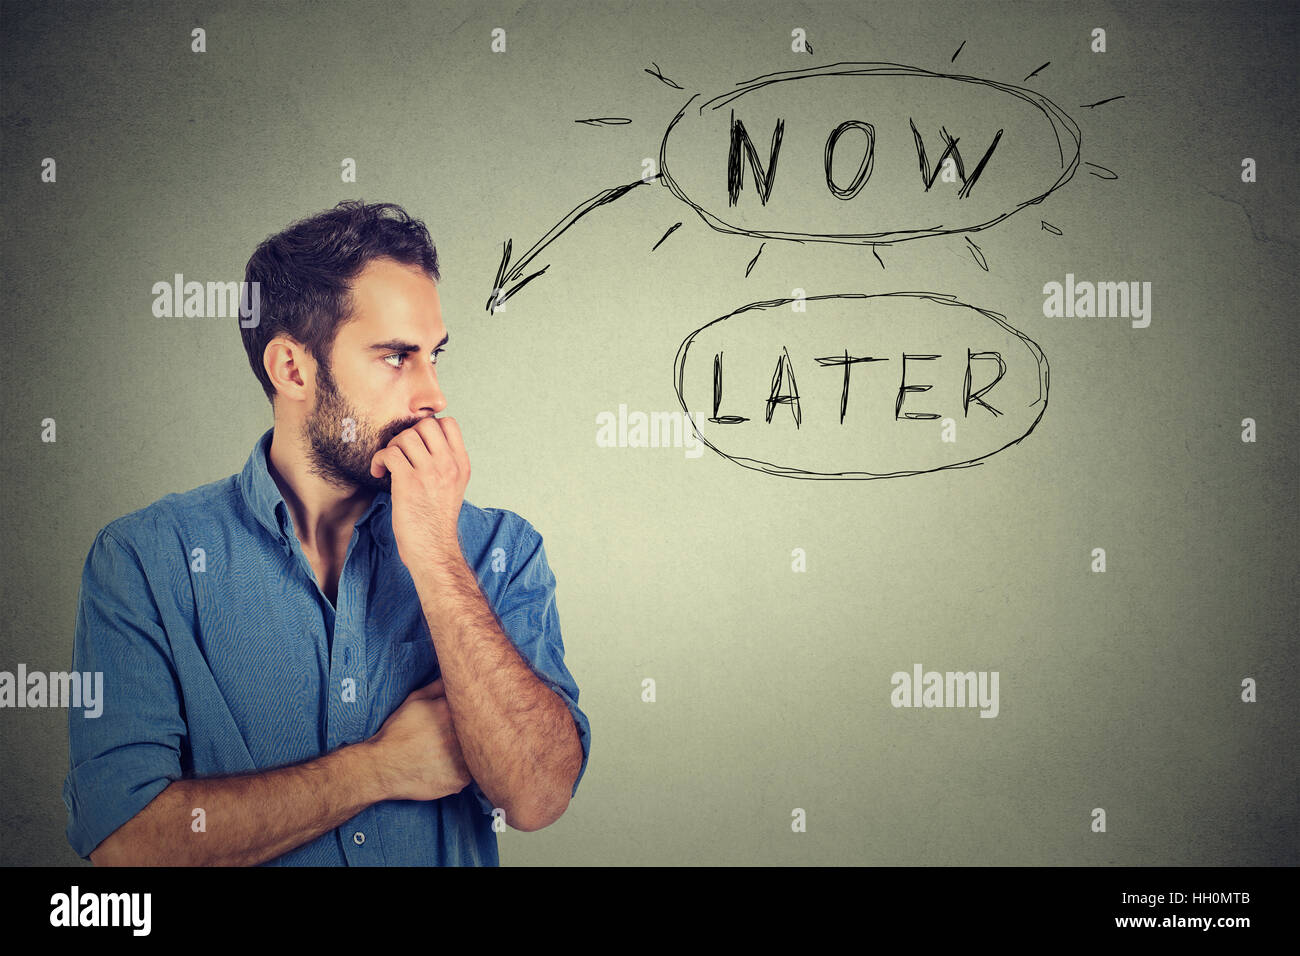 Now or later. Man thinking biting his fingernails looking worried anxious making up his mind isolated on grey wall background. Human face expression Stock Photo